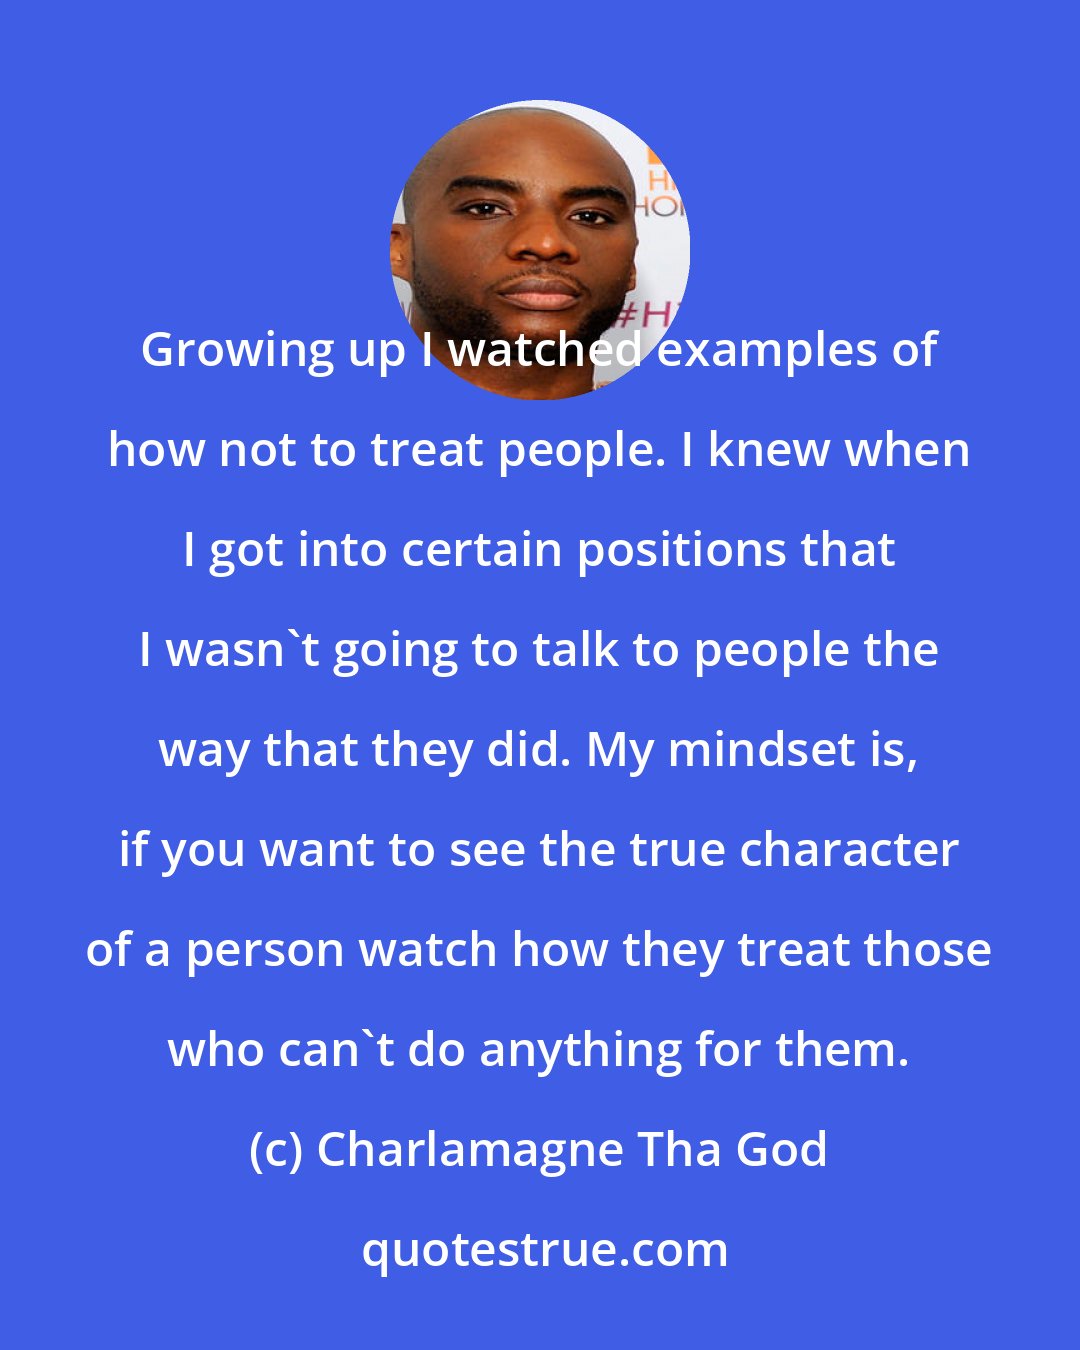 Charlamagne Tha God: Growing up I watched examples of how not to treat people. I knew when I got into certain positions that I wasn't going to talk to people the way that they did. My mindset is, if you want to see the true character of a person watch how they treat those who can't do anything for them.